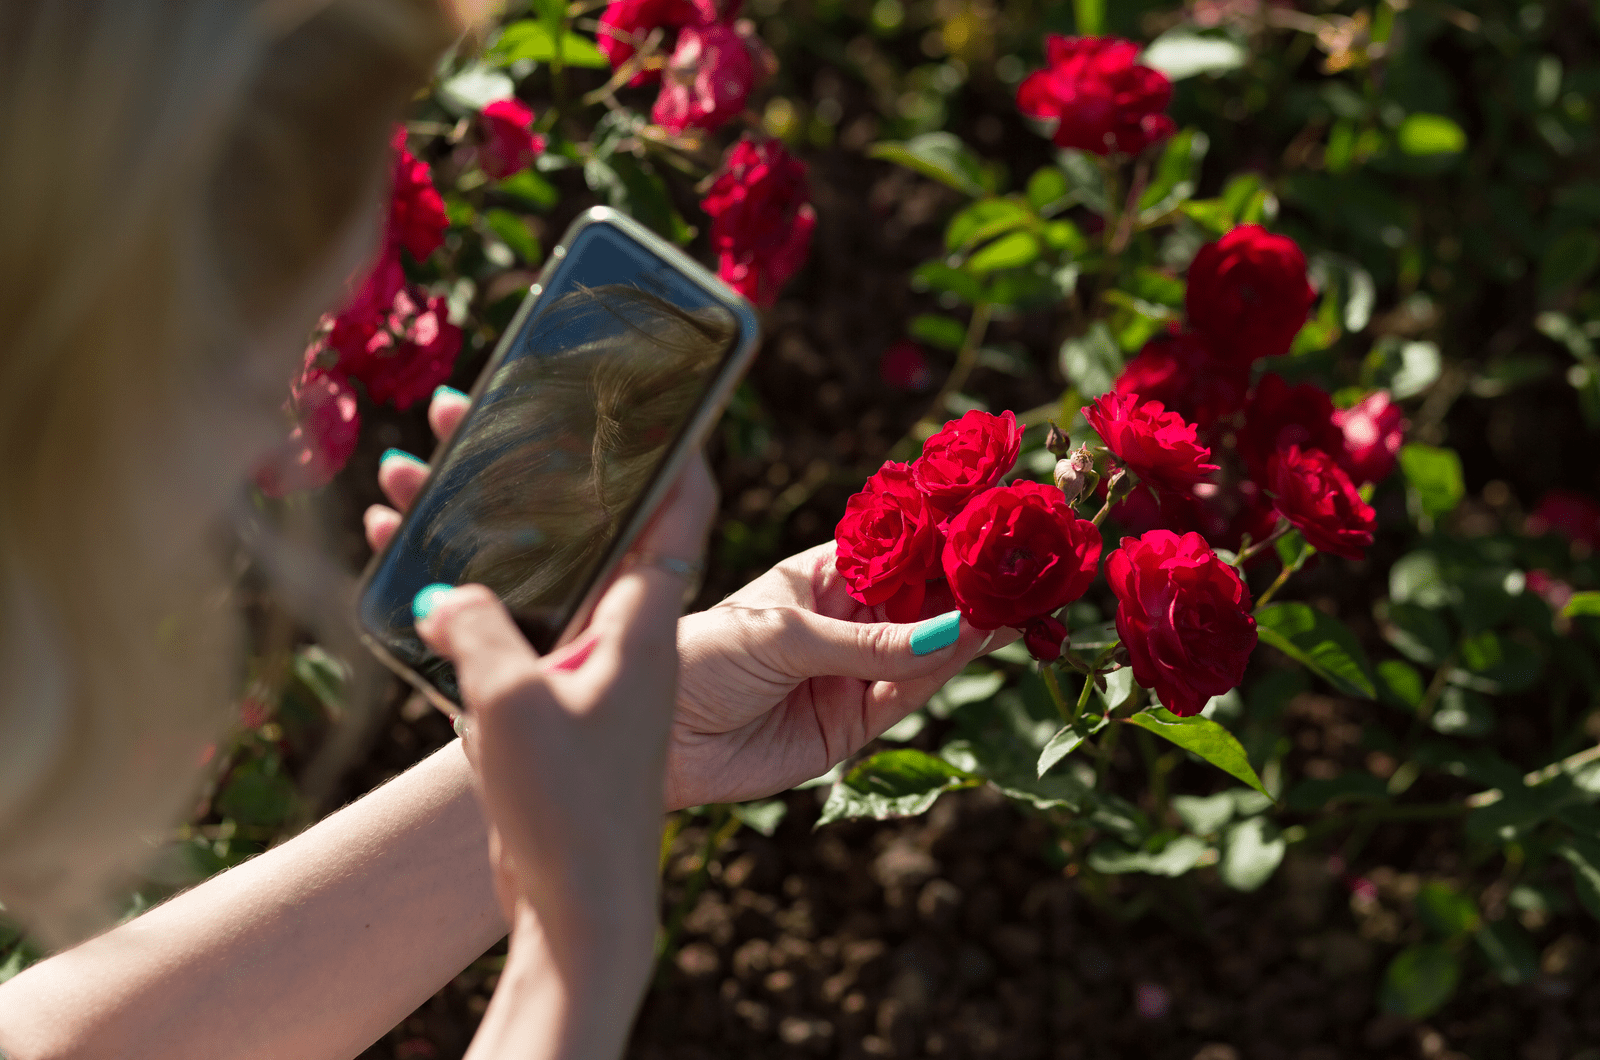 a woman with a phone takes a picture of a red rose